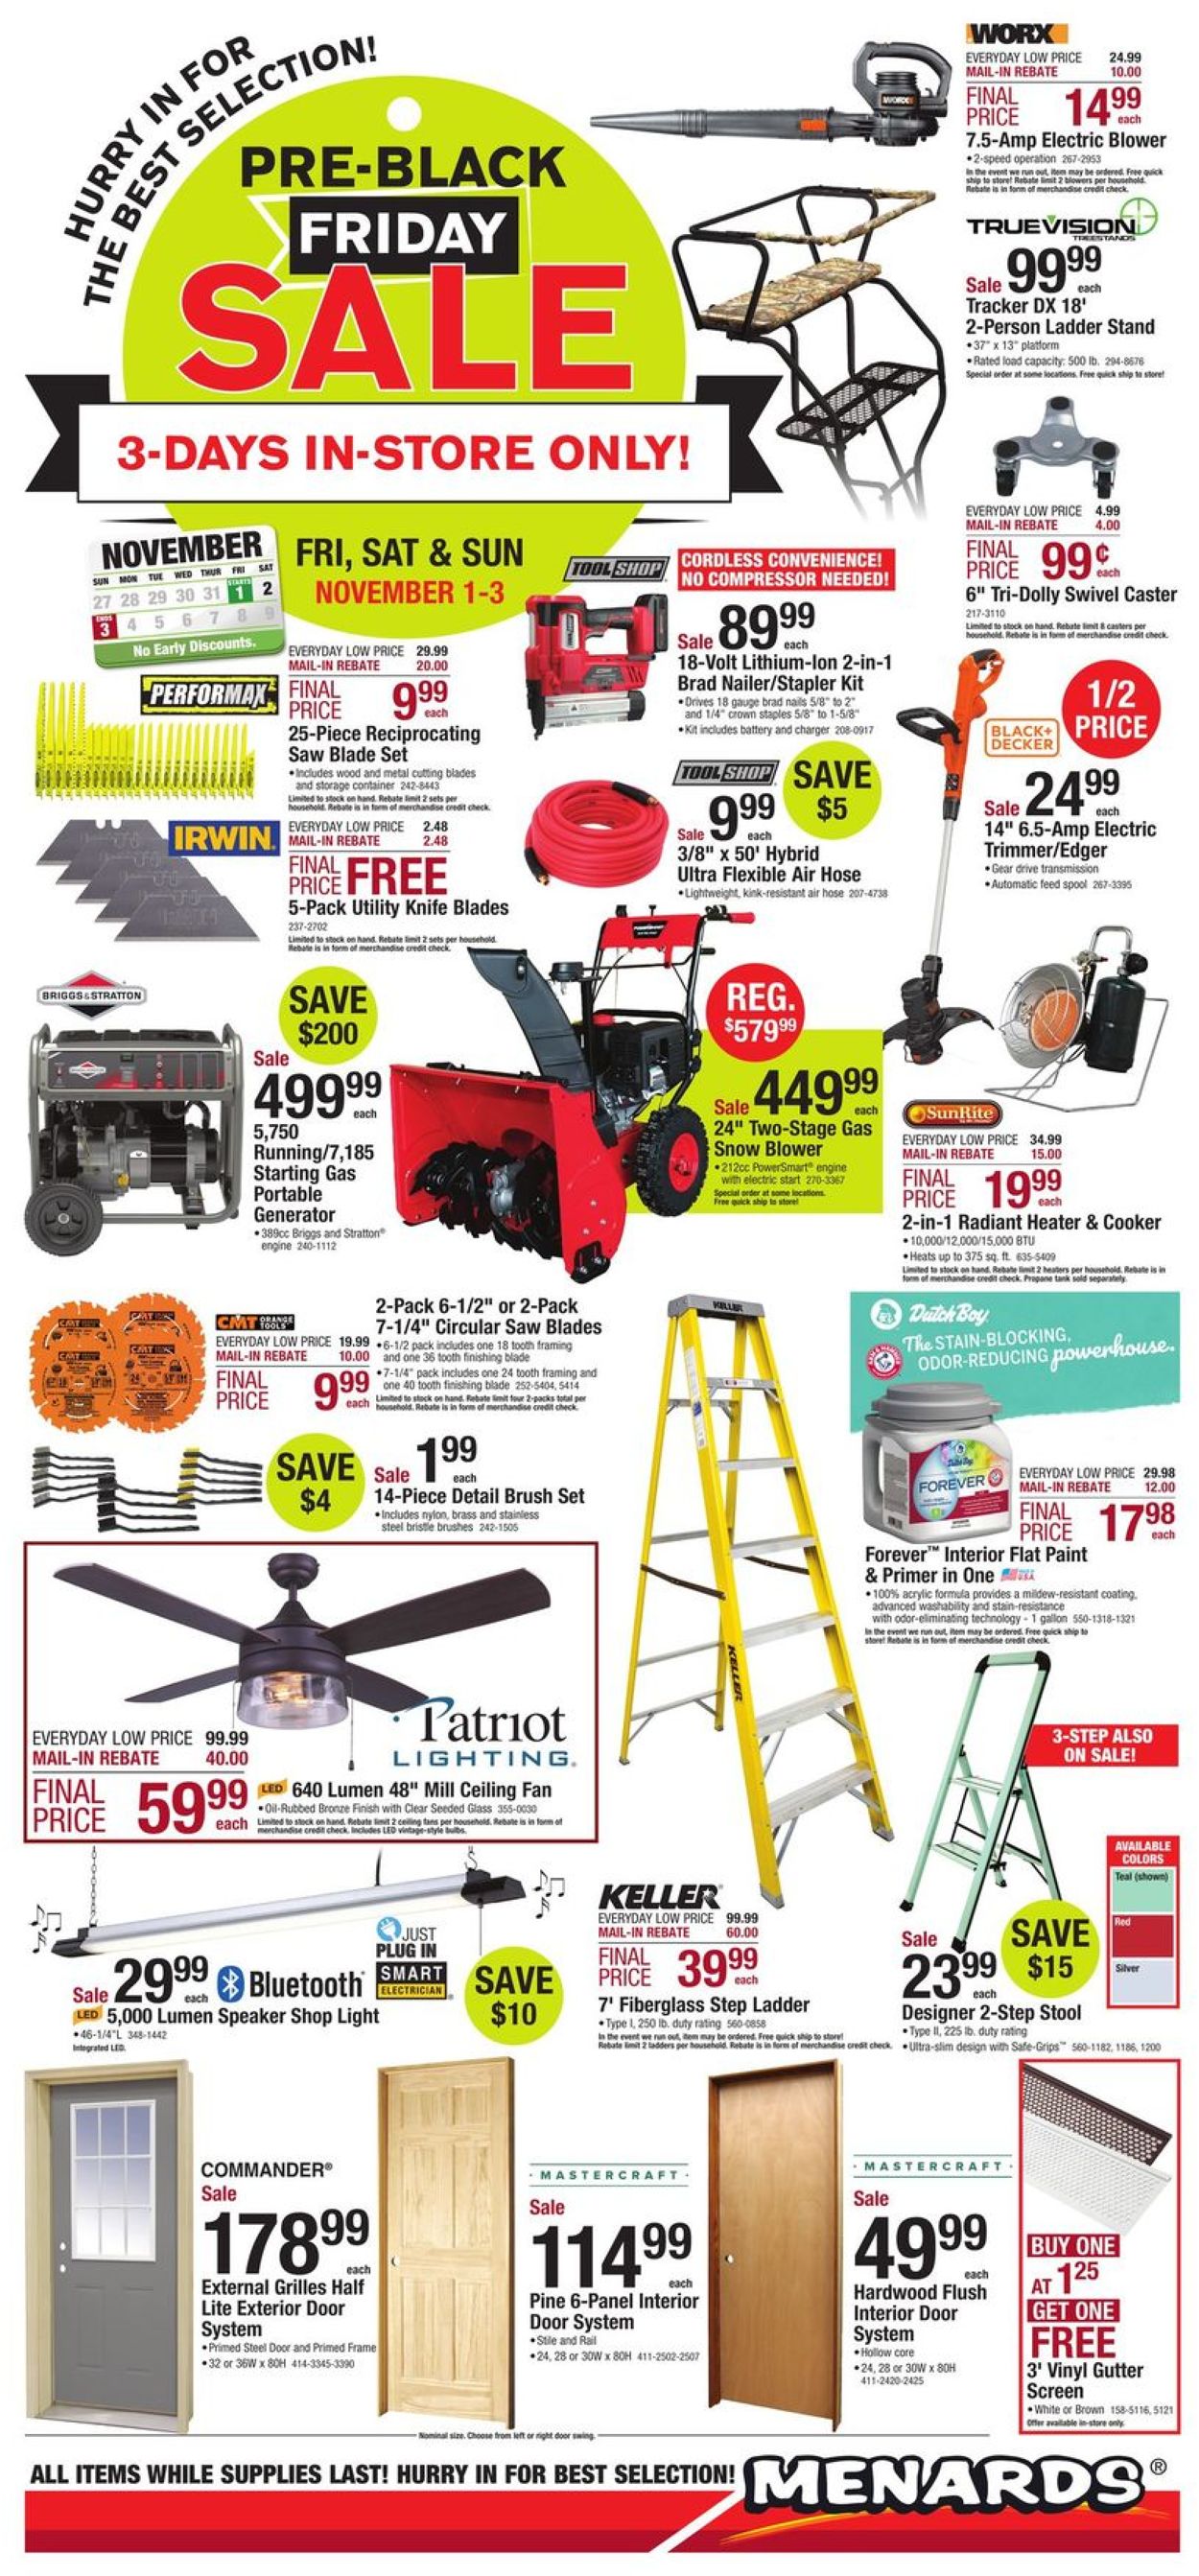 Menards - Black Friday 2019 Current weekly ad 11/01 - 11/03/2019 - 0